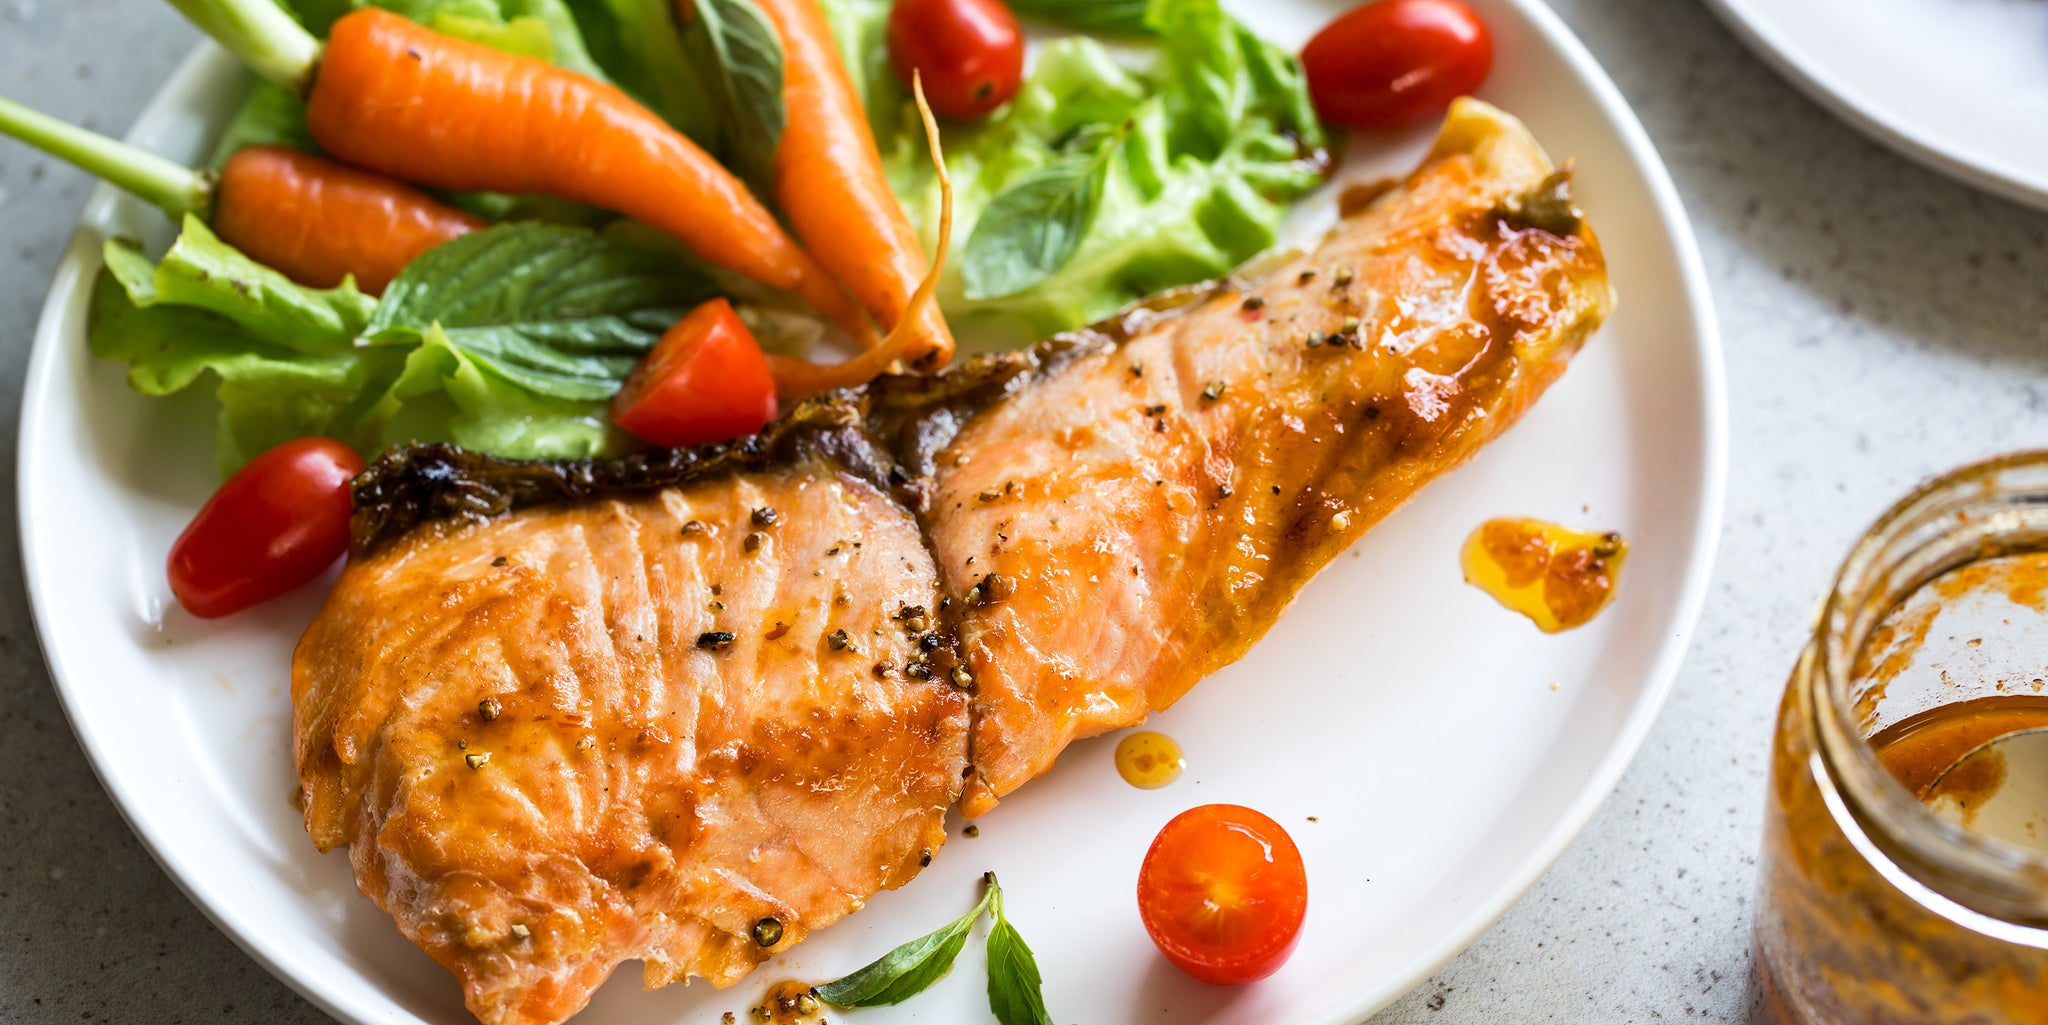 Vitamin D-rich foods, including salmon and a salad.